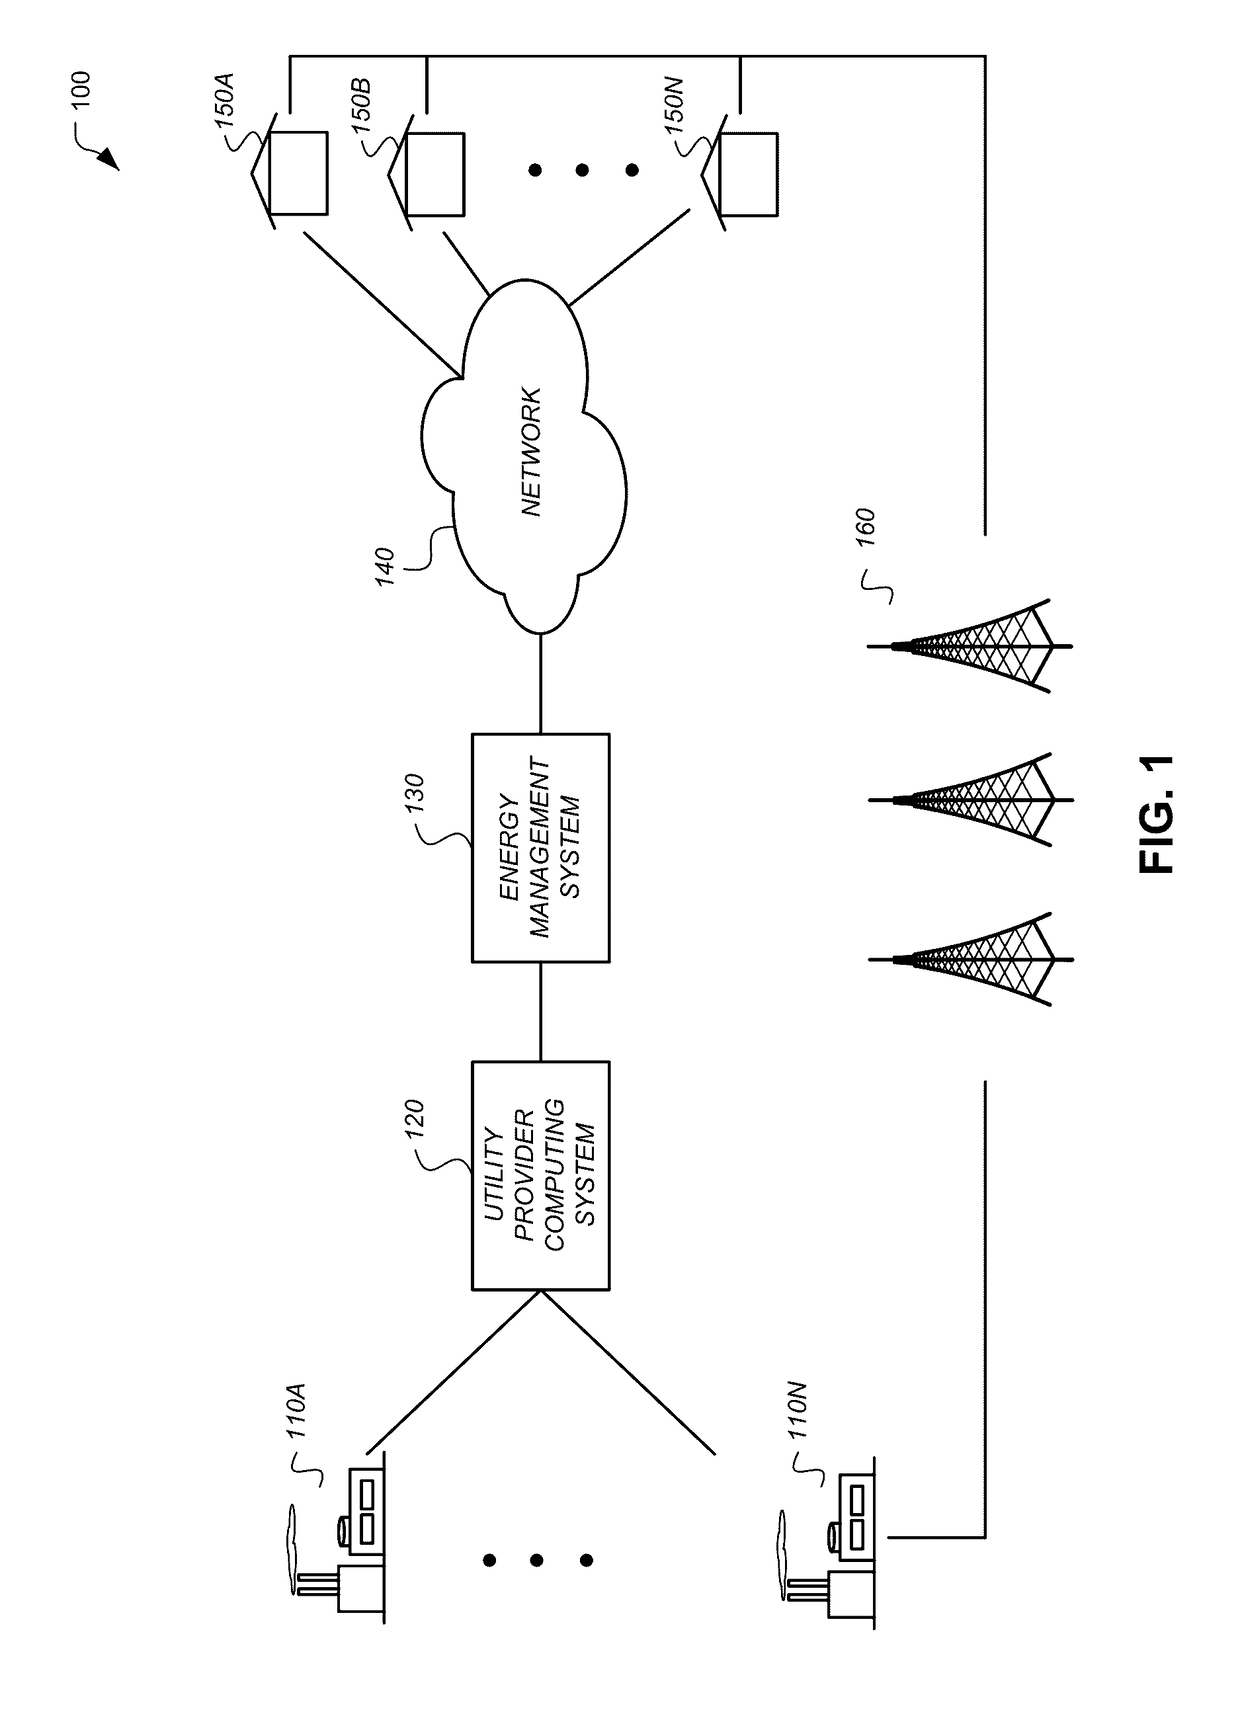 Systems, apparatus and methods for managing demand-response programs and events